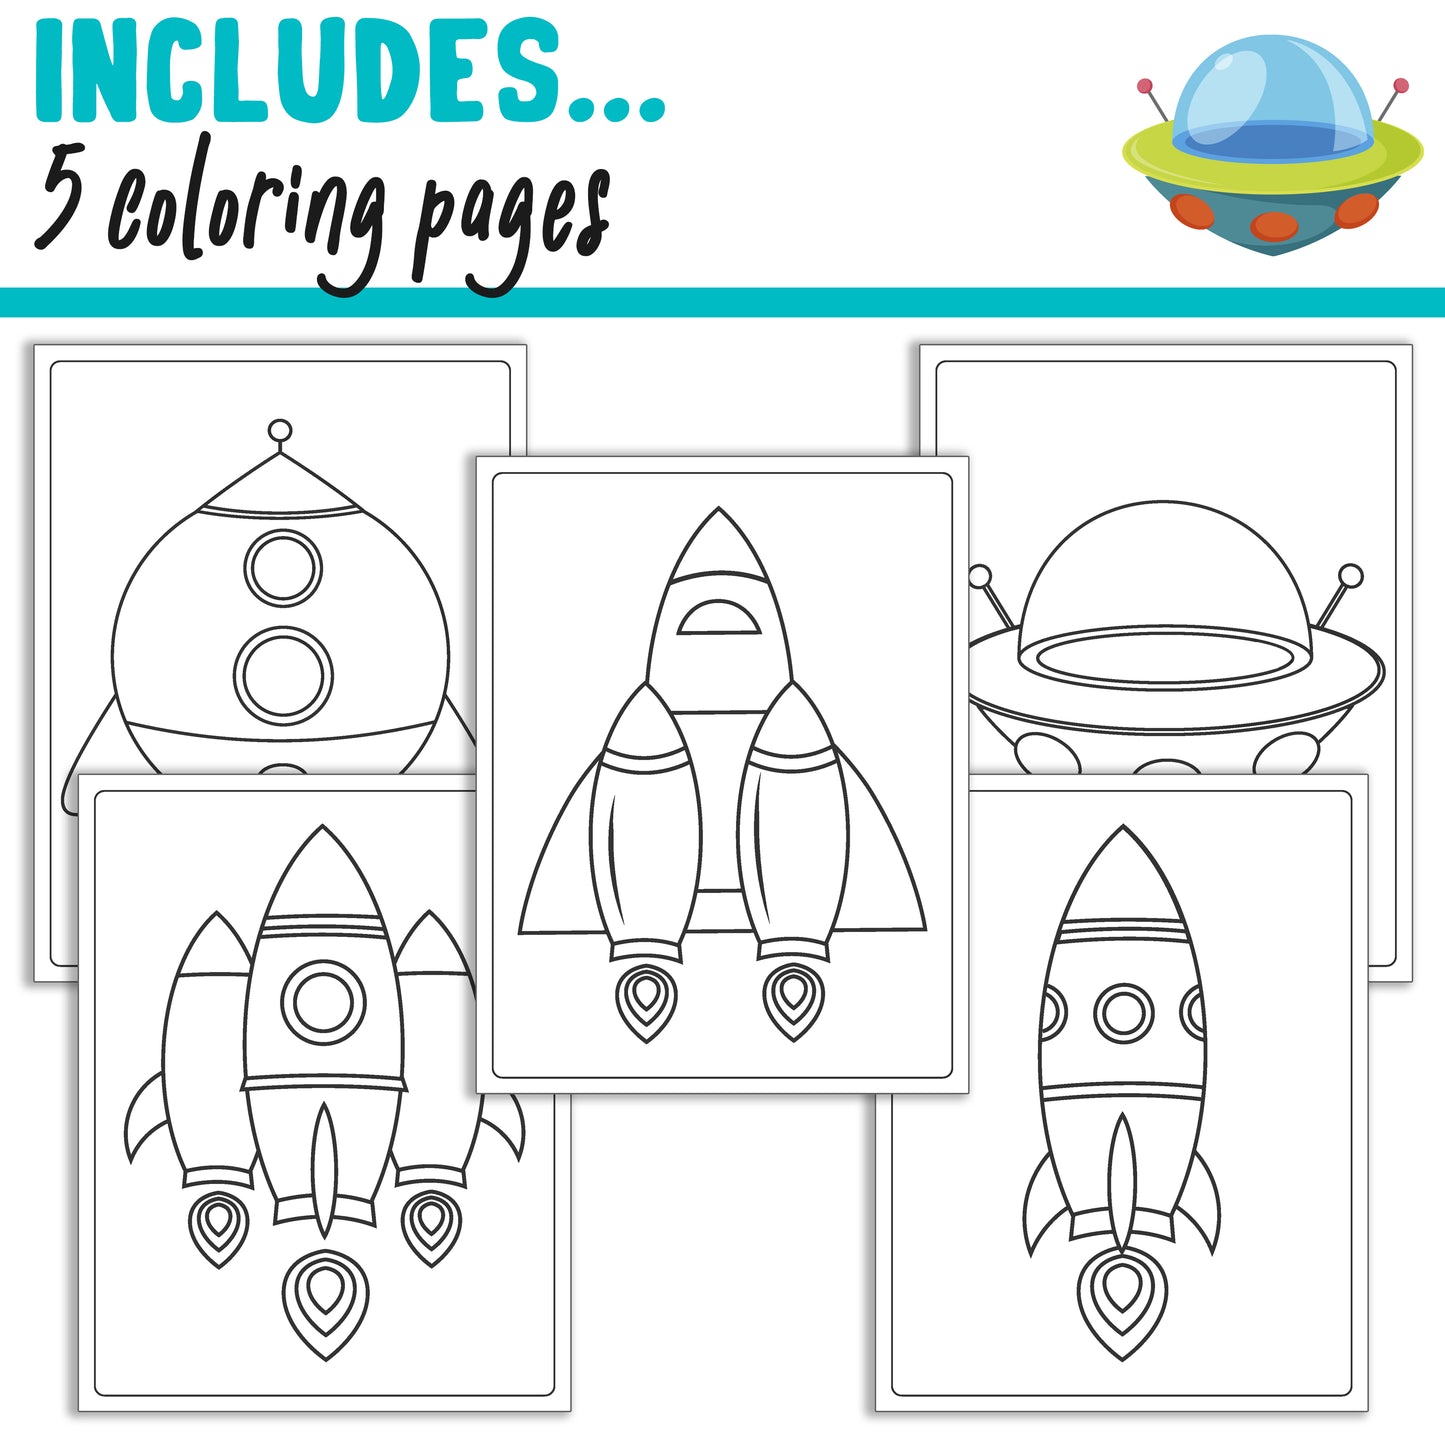 Learn How to Draw Spaceships, Directed Drawing Step by Step Tutorial, Includes 5 Coloring Pages, PDF File, Instant Download